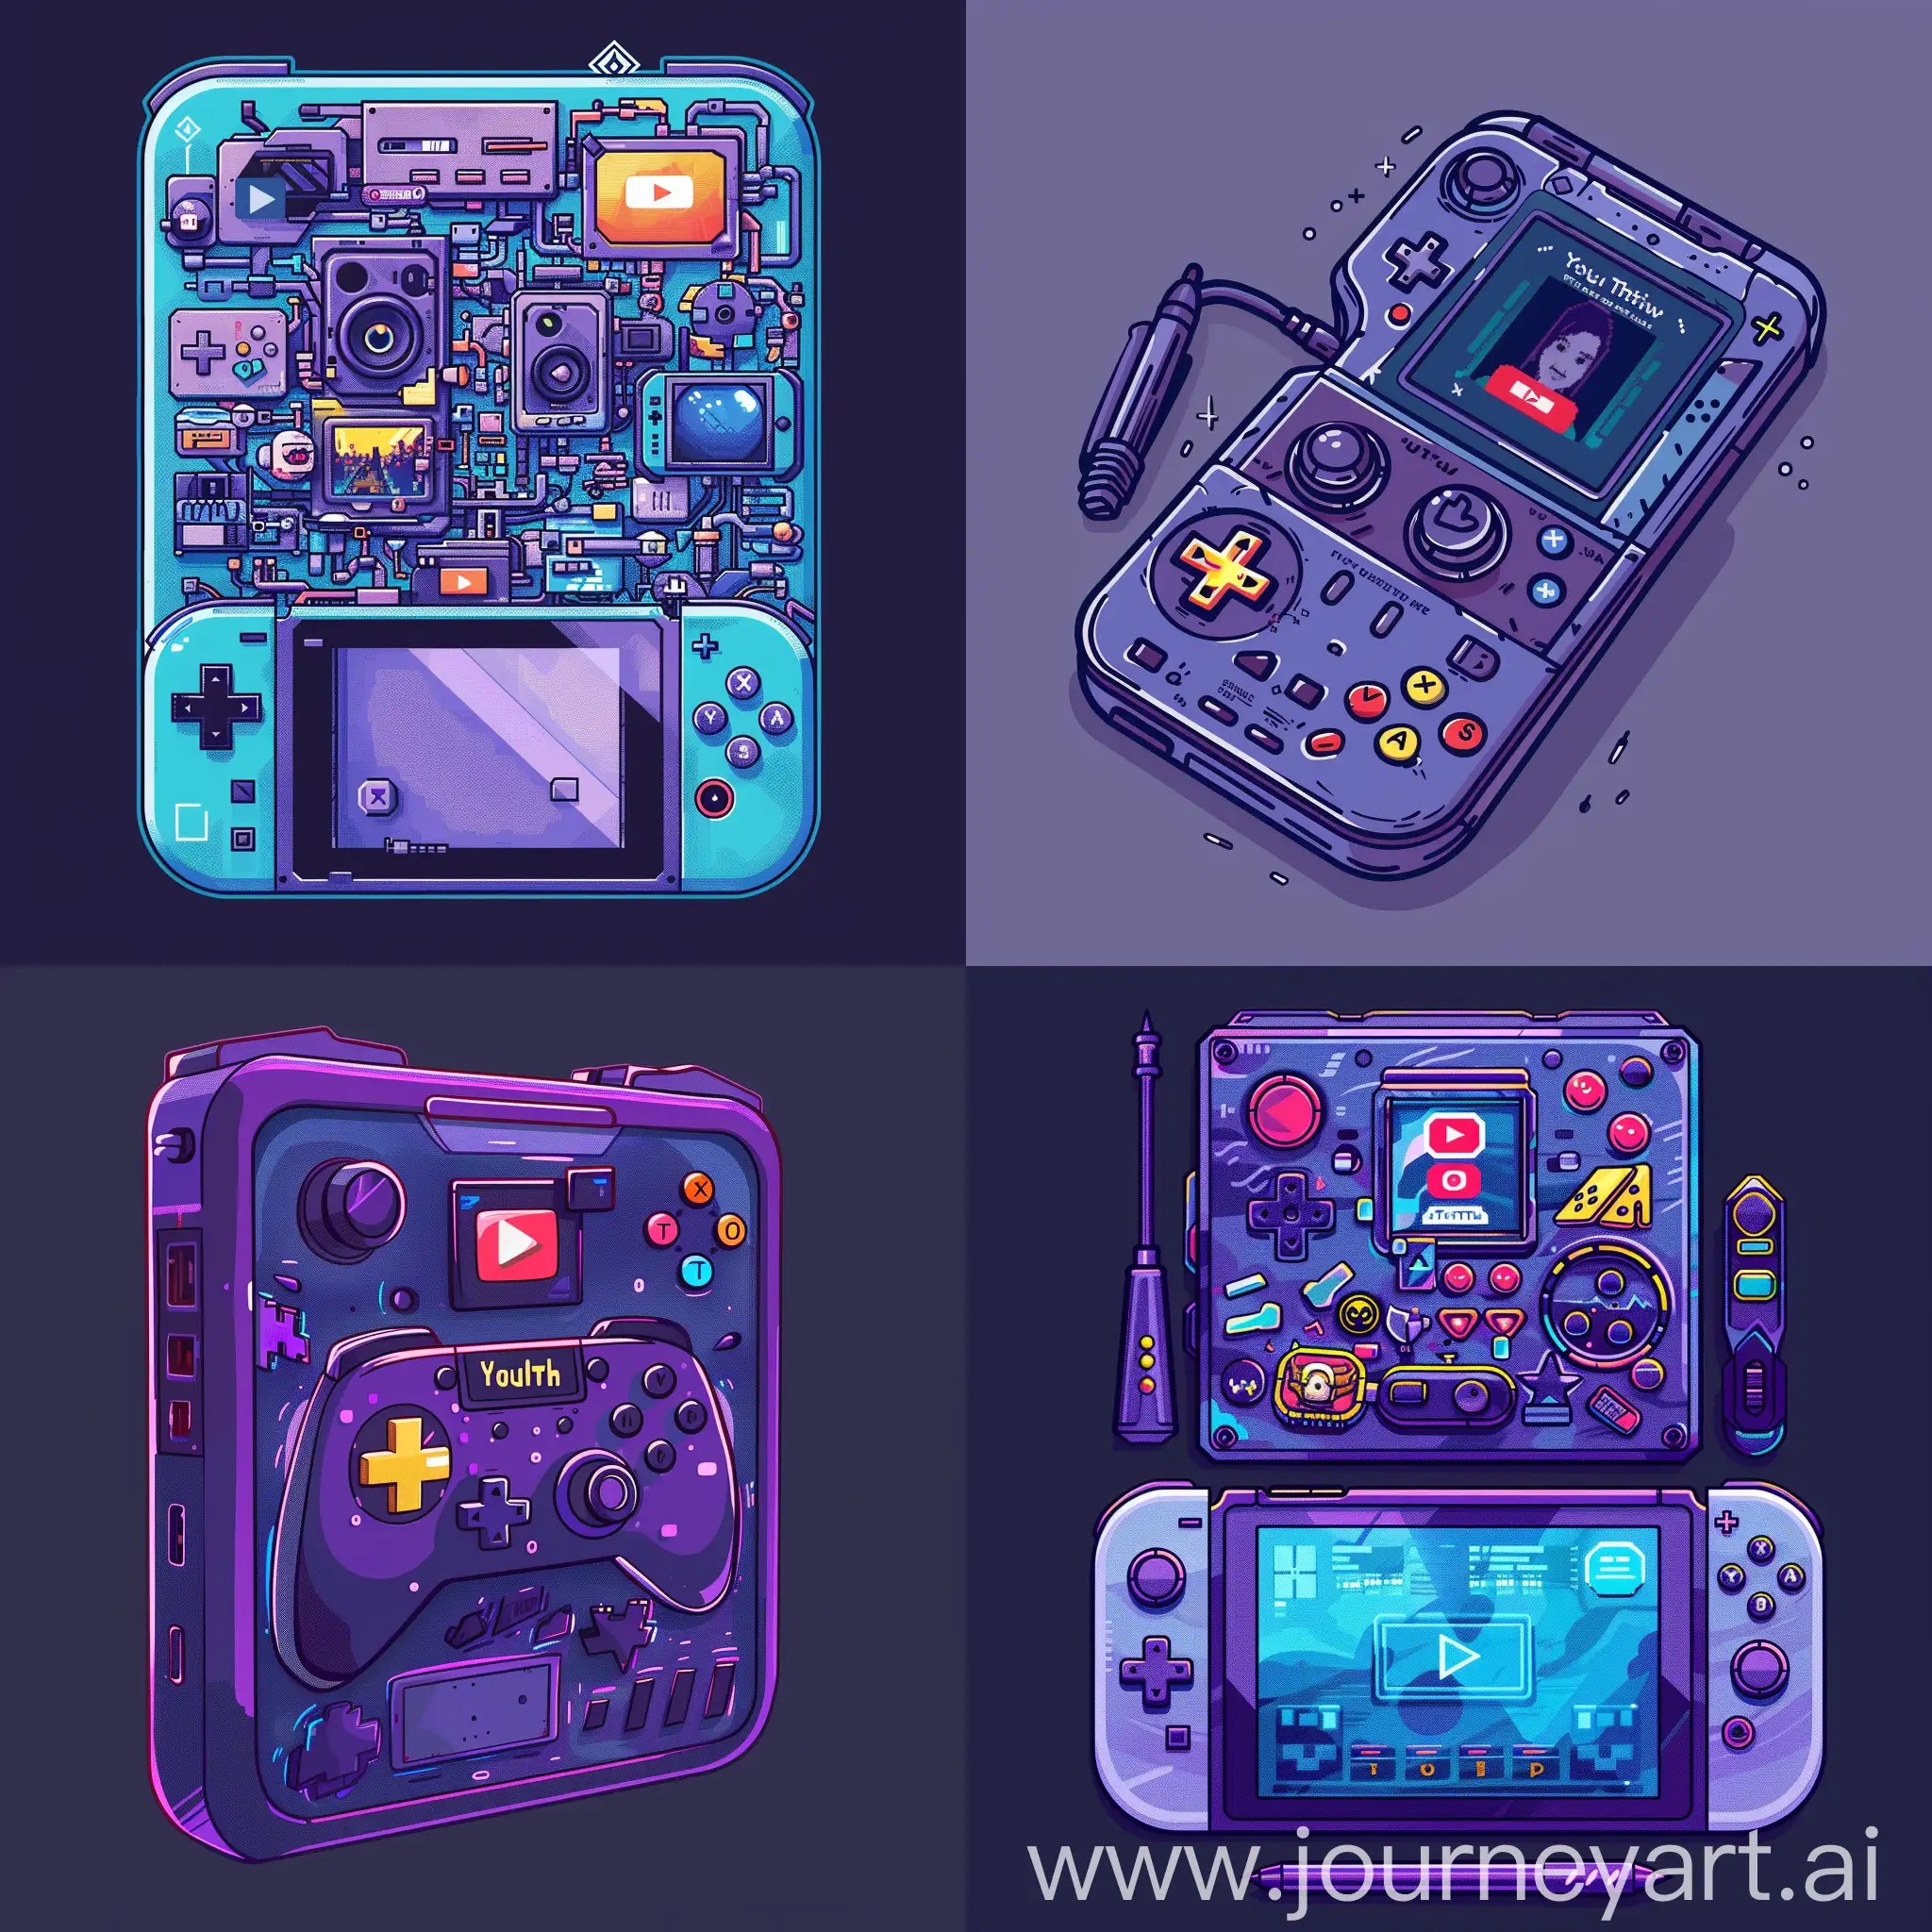 Pixelated-YouTube-and-Twitch-Elements-in-Rectangular-Form